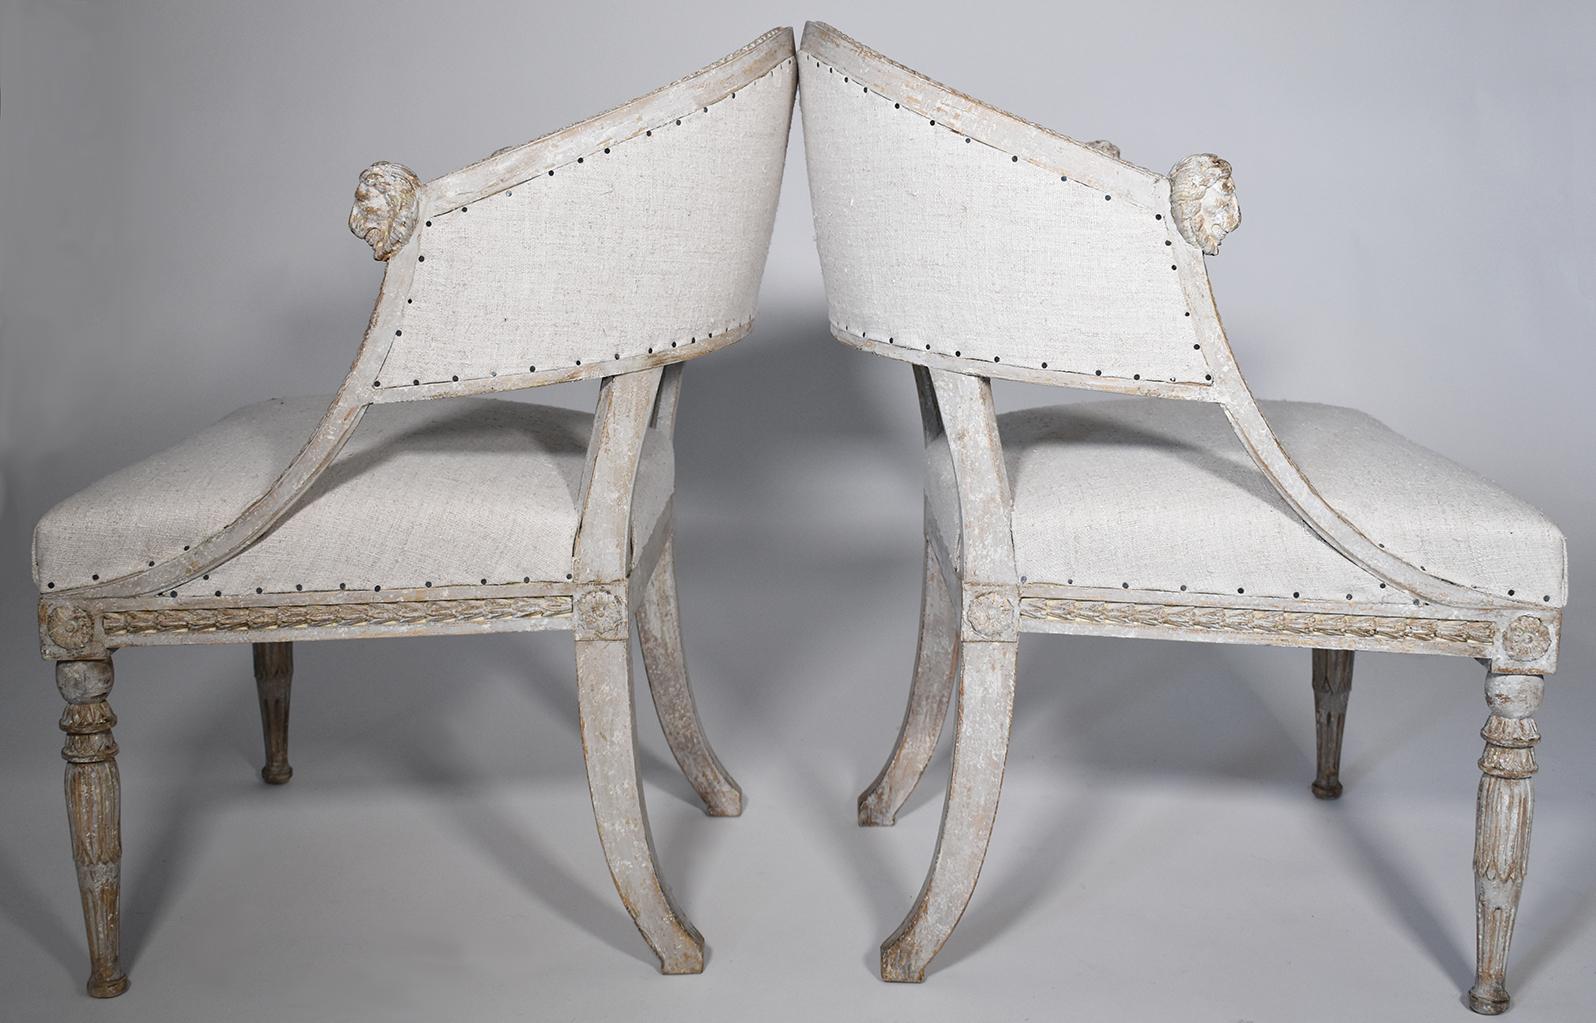 Elegant pair of 19th century Gustavian barrel back armchairs with detailed lions' head carvings on arms, saber legs, scraped to original patina with European Burlap. Carving on the chair back at top of seat rest, sides, apron and legs add to the